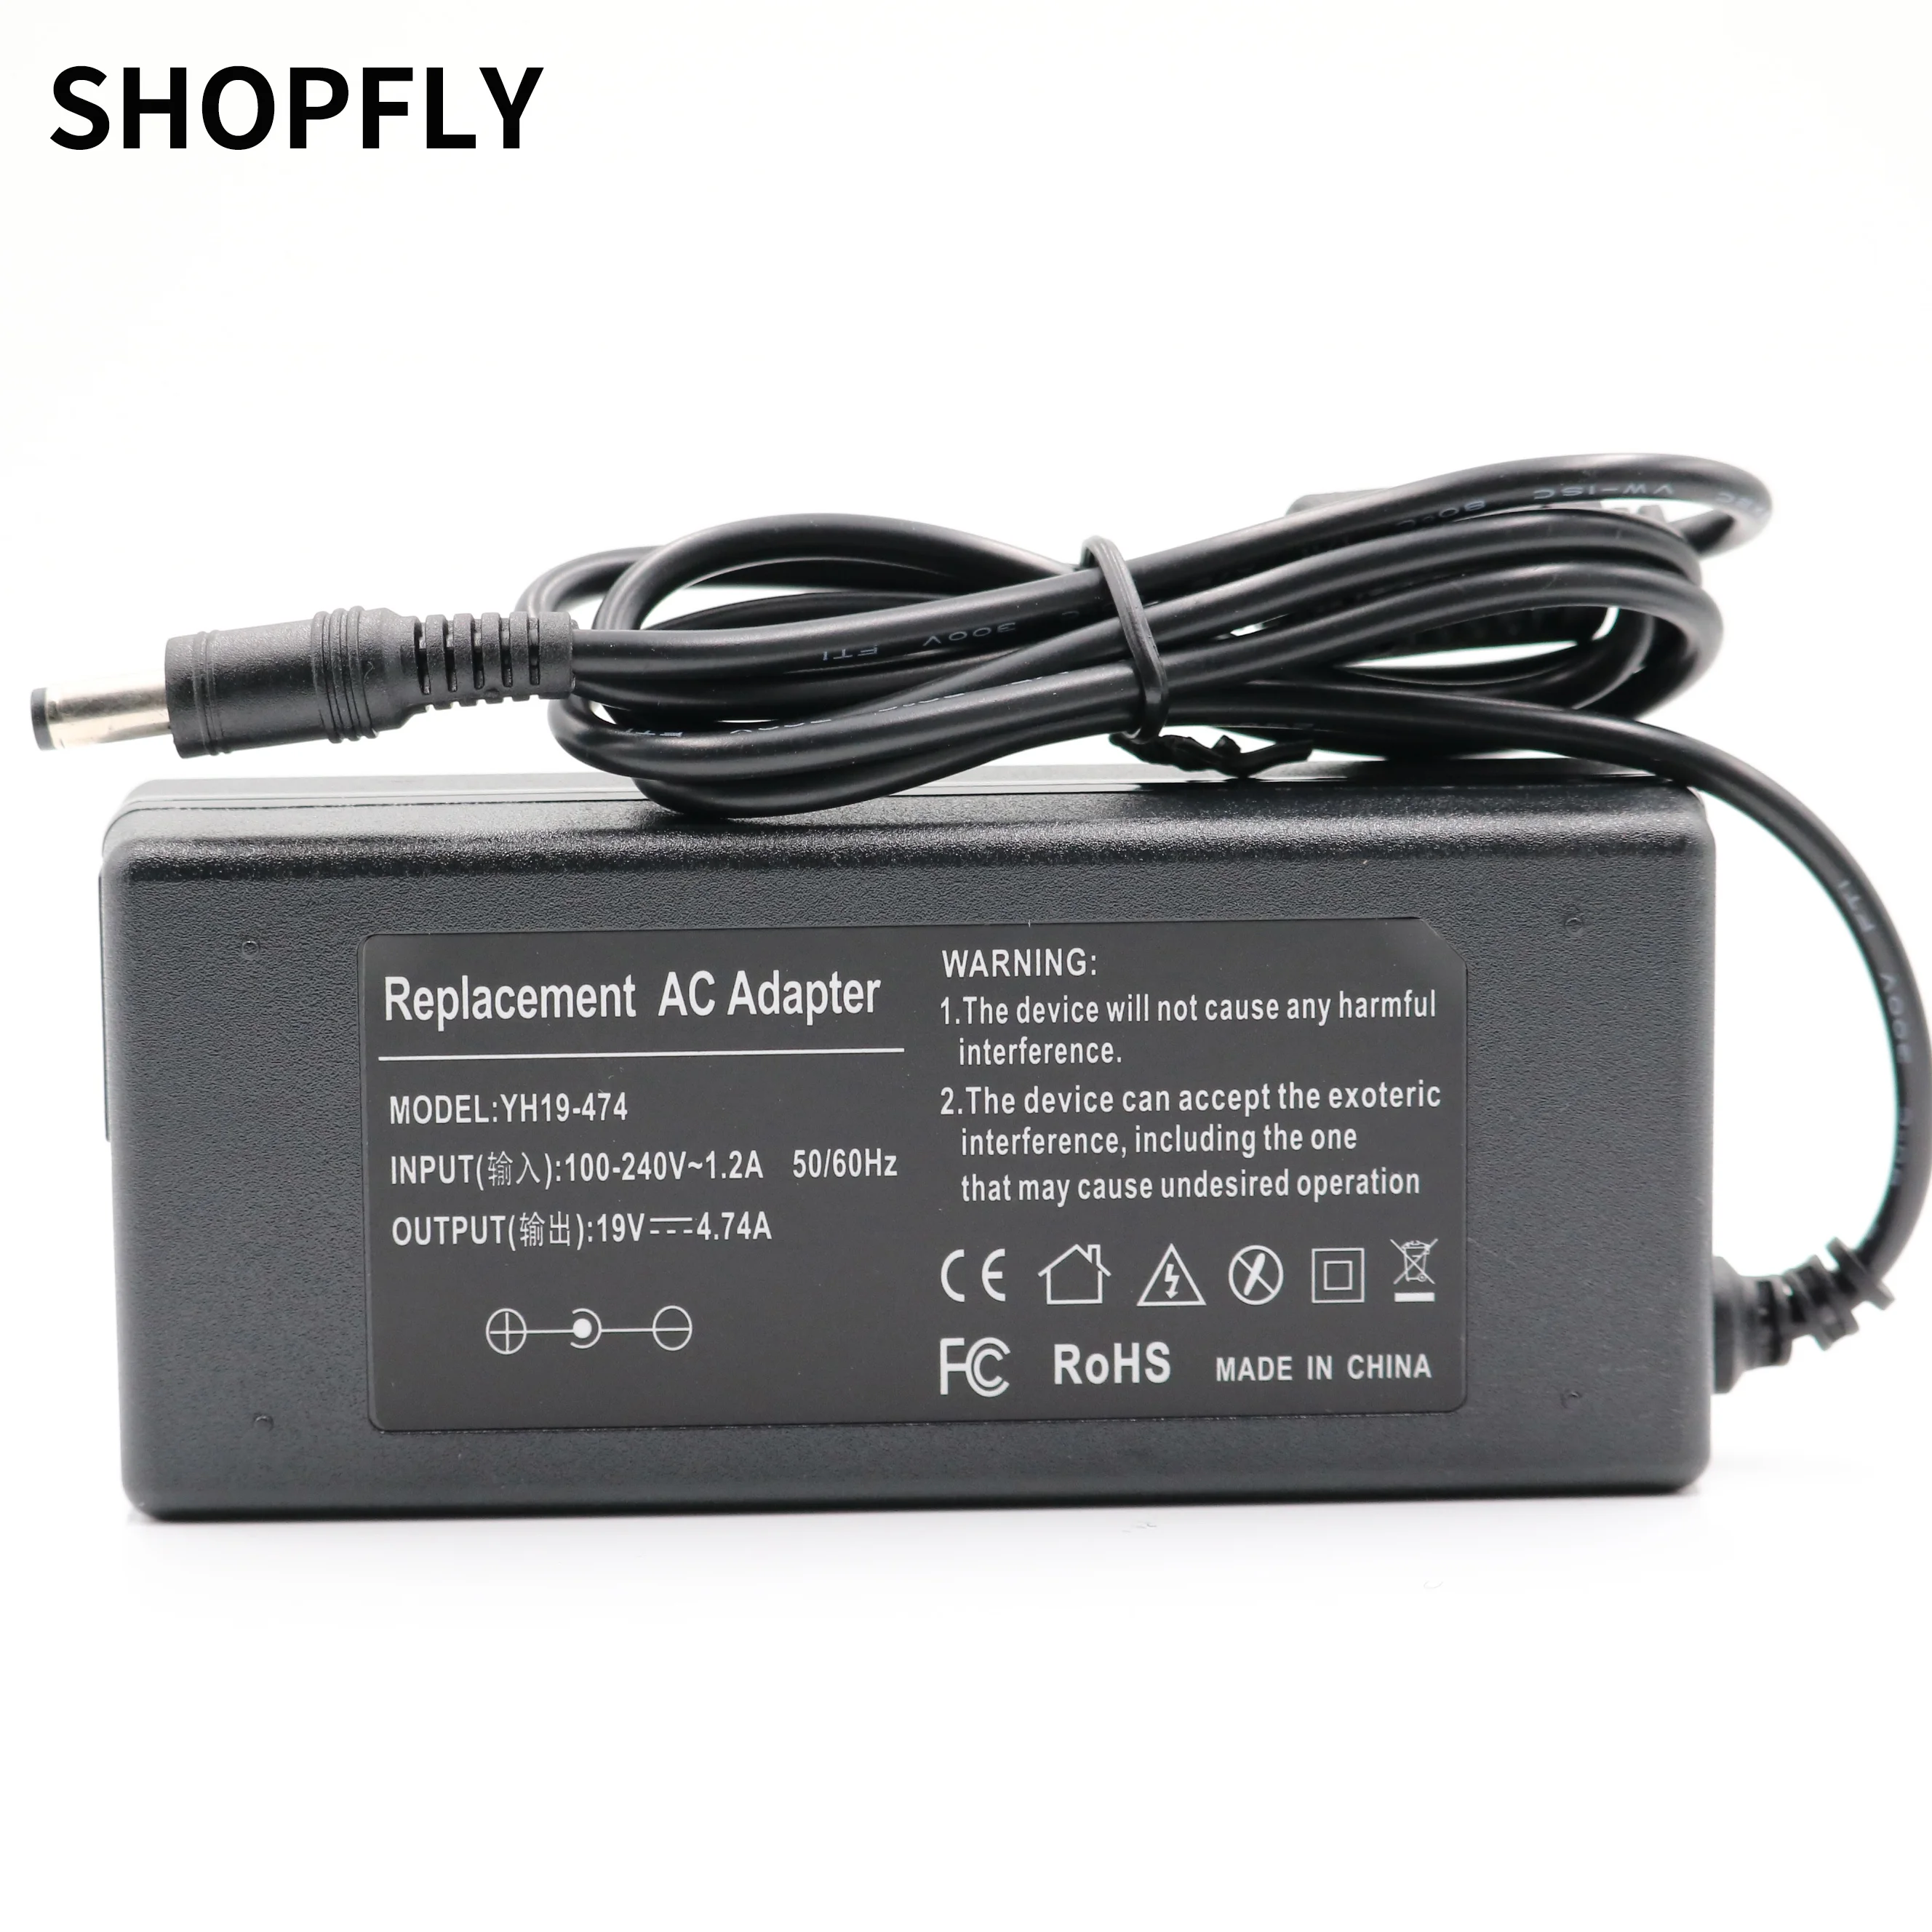 

For toshiba laptop charger For Toshiba Satellite A300 A200 C850 C850D L850 L750 L650 L500 for Toshiba power adapter 19V 4.74A